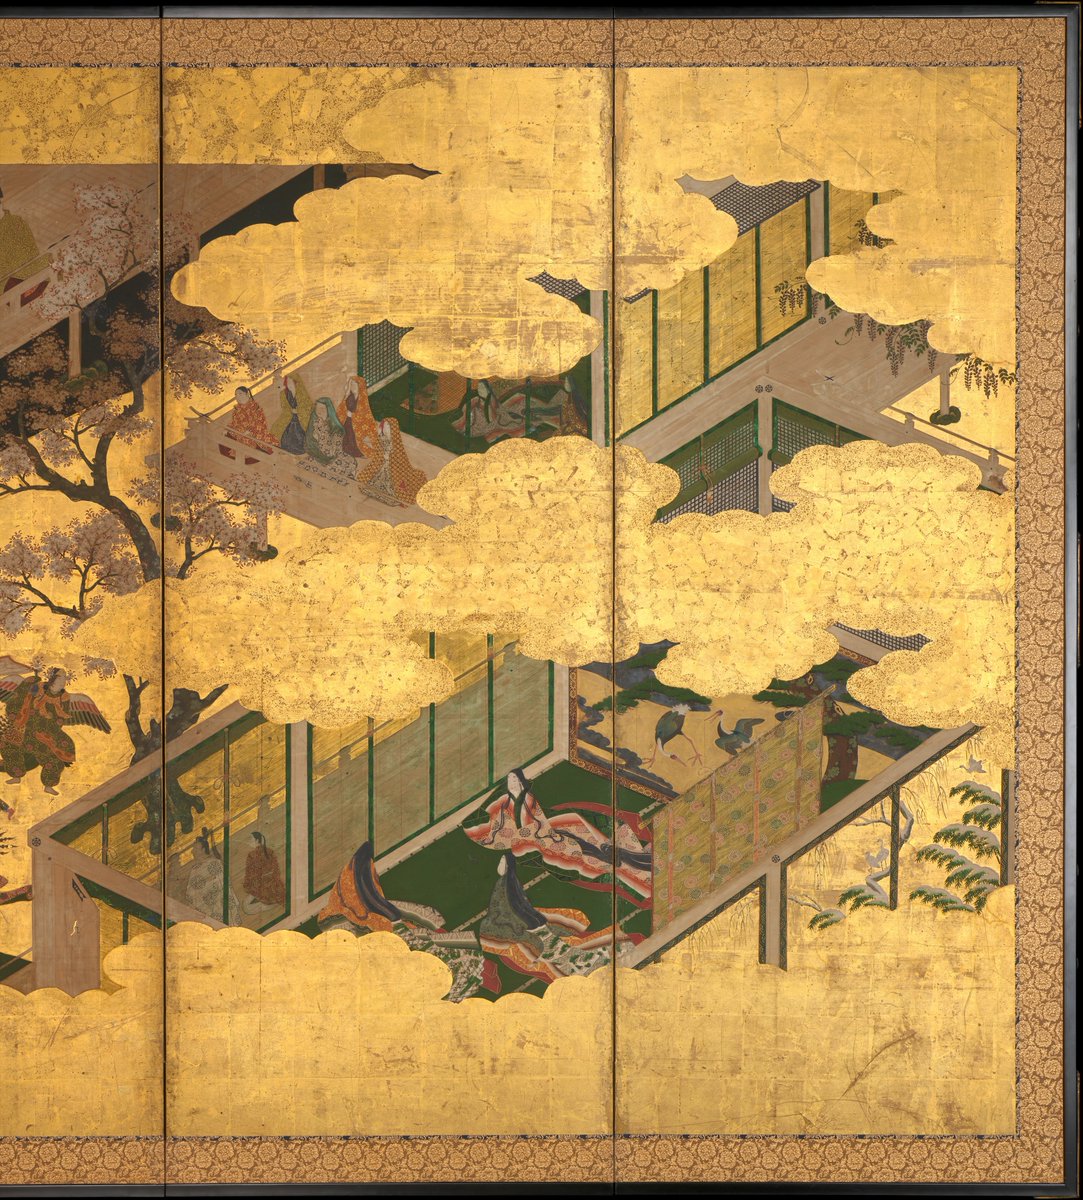 “Butterflies” by Tosa Mitsuyoshi, late 16th–early 17th century

#tosaschool